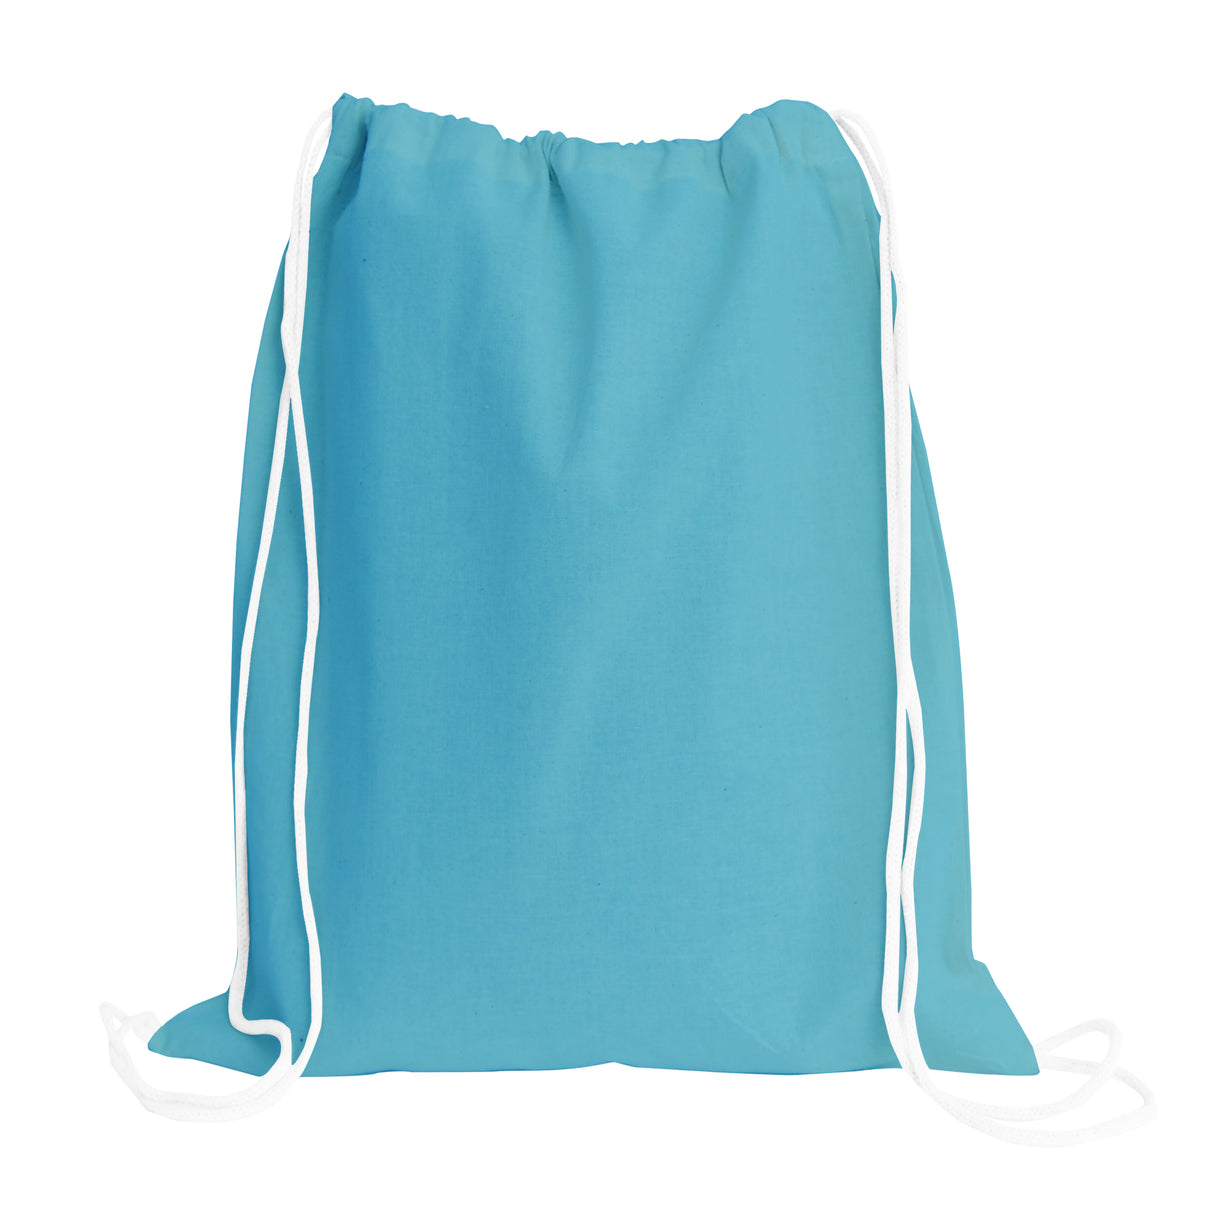 Affordable Turquoise Drawstring Bags 